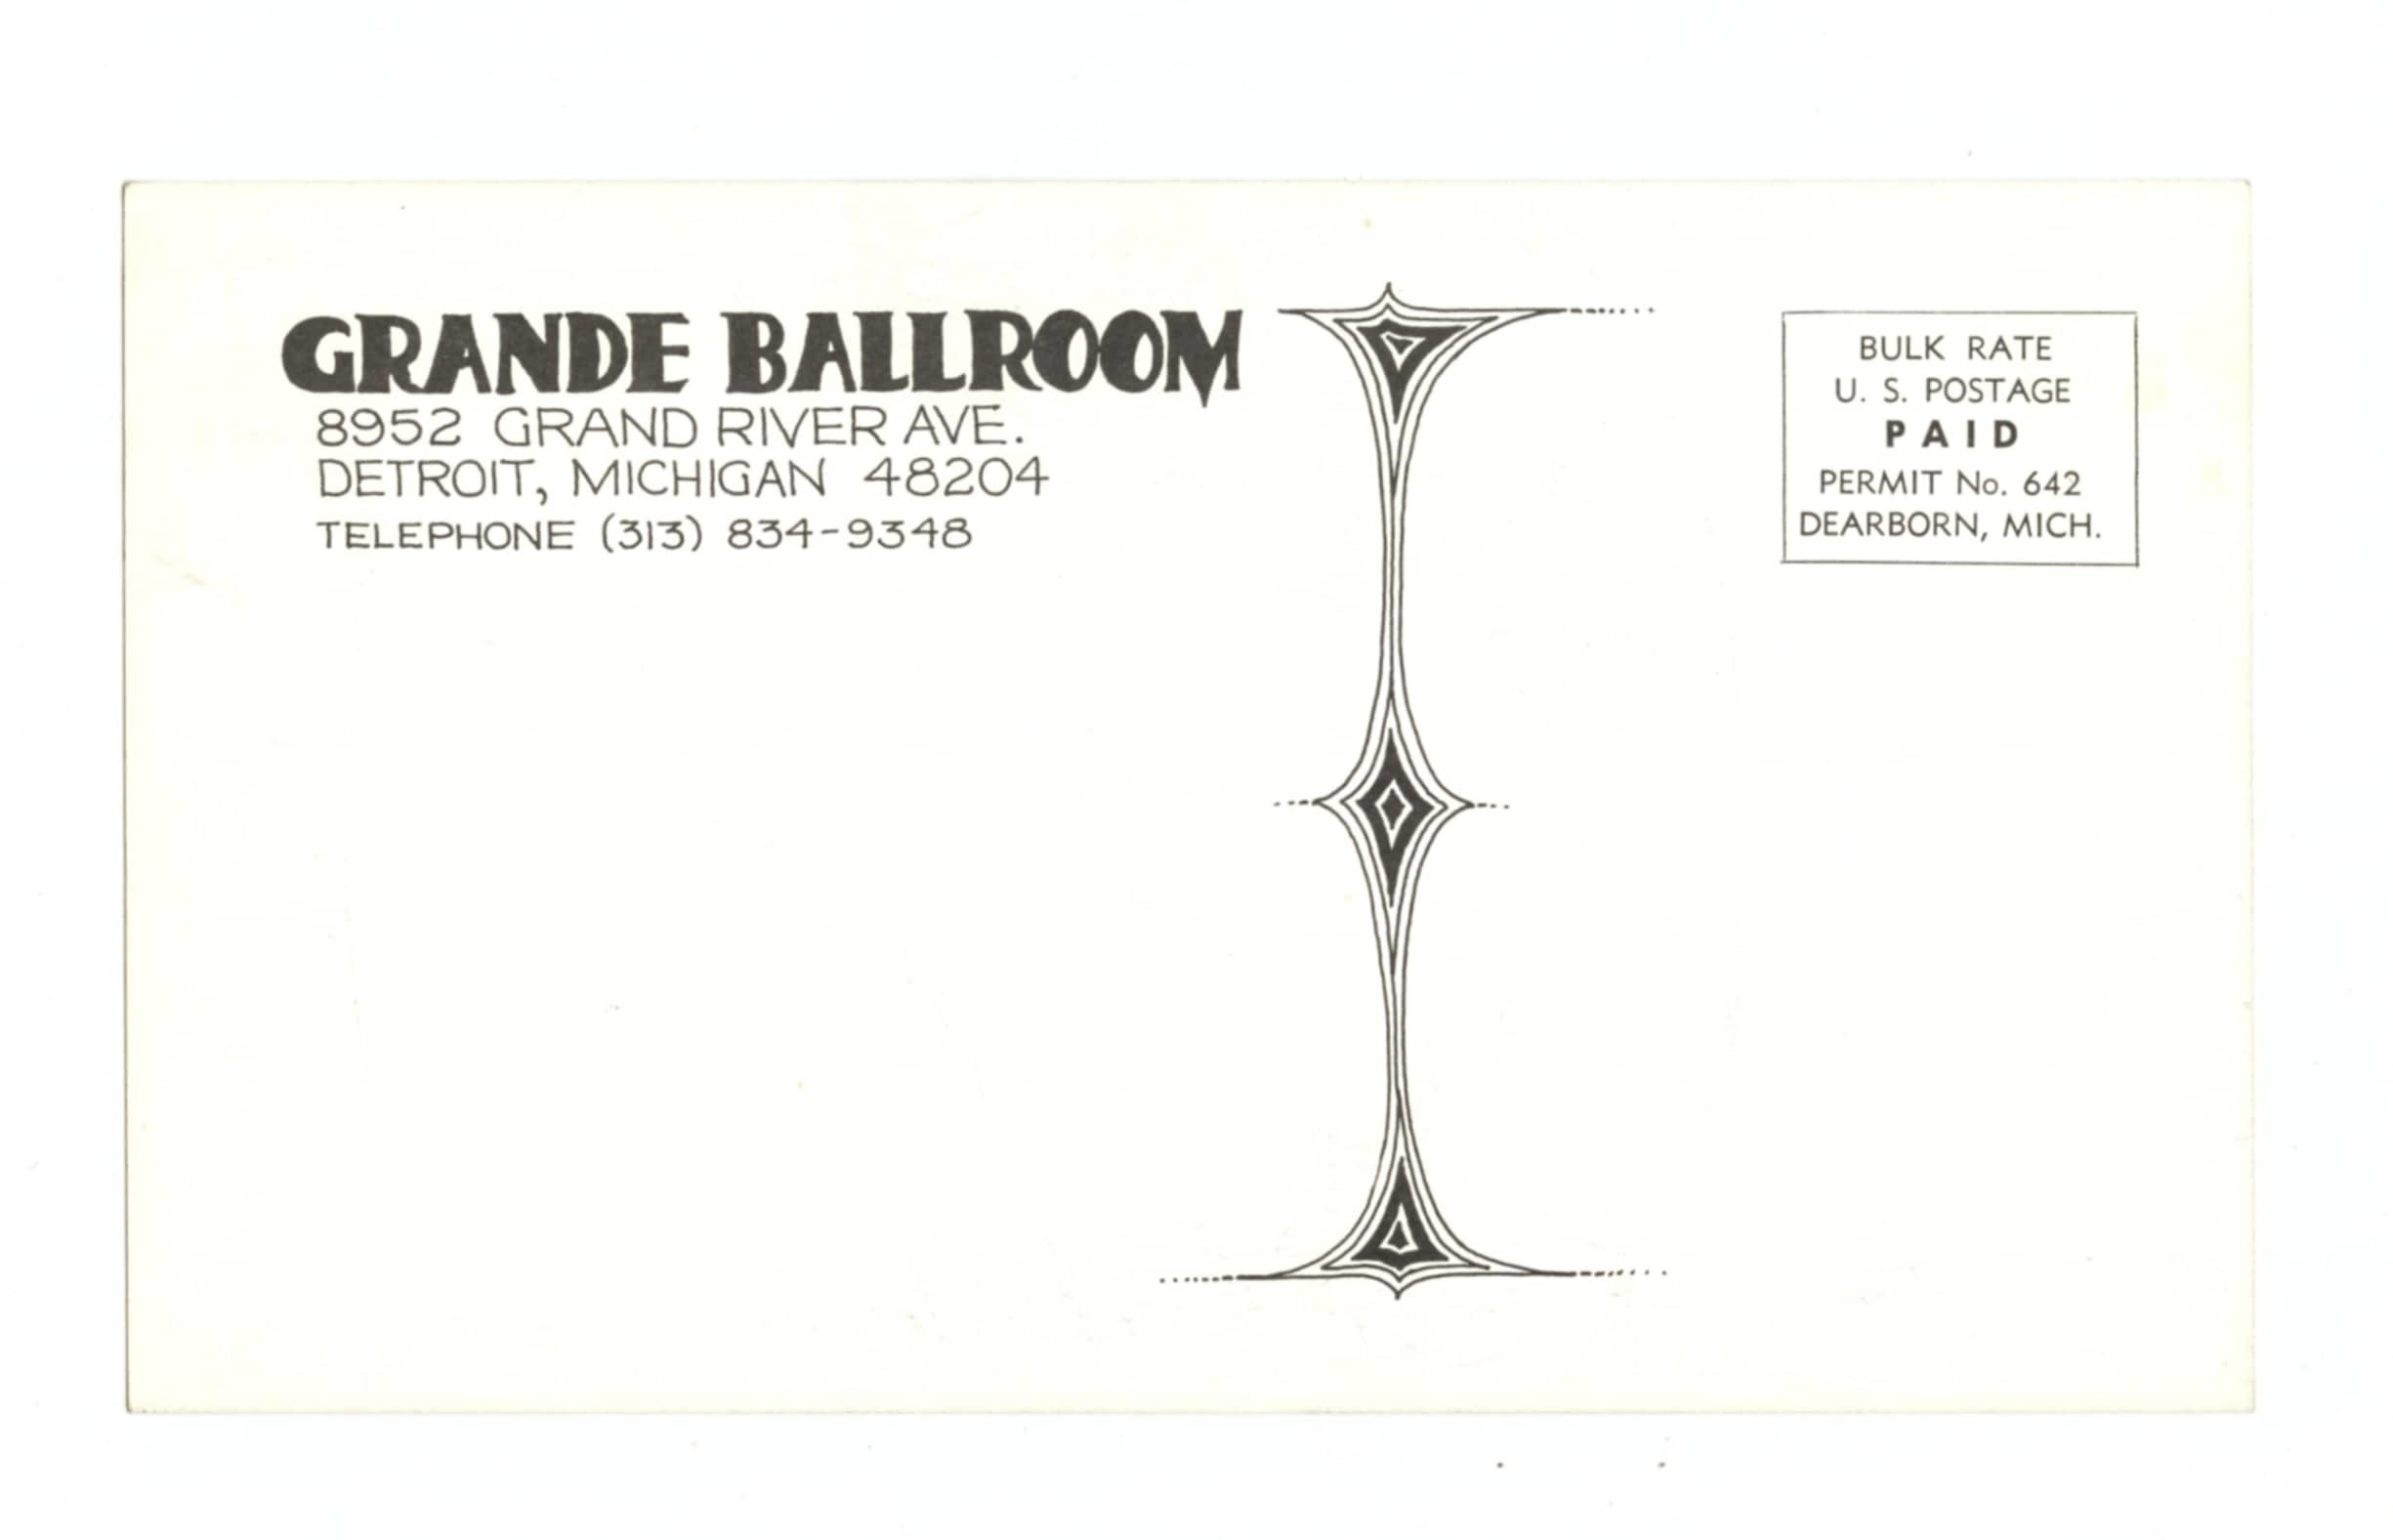 Grande Ballroom Postcard 1968 Aug 9 Canned Heat Carl Lunges signed